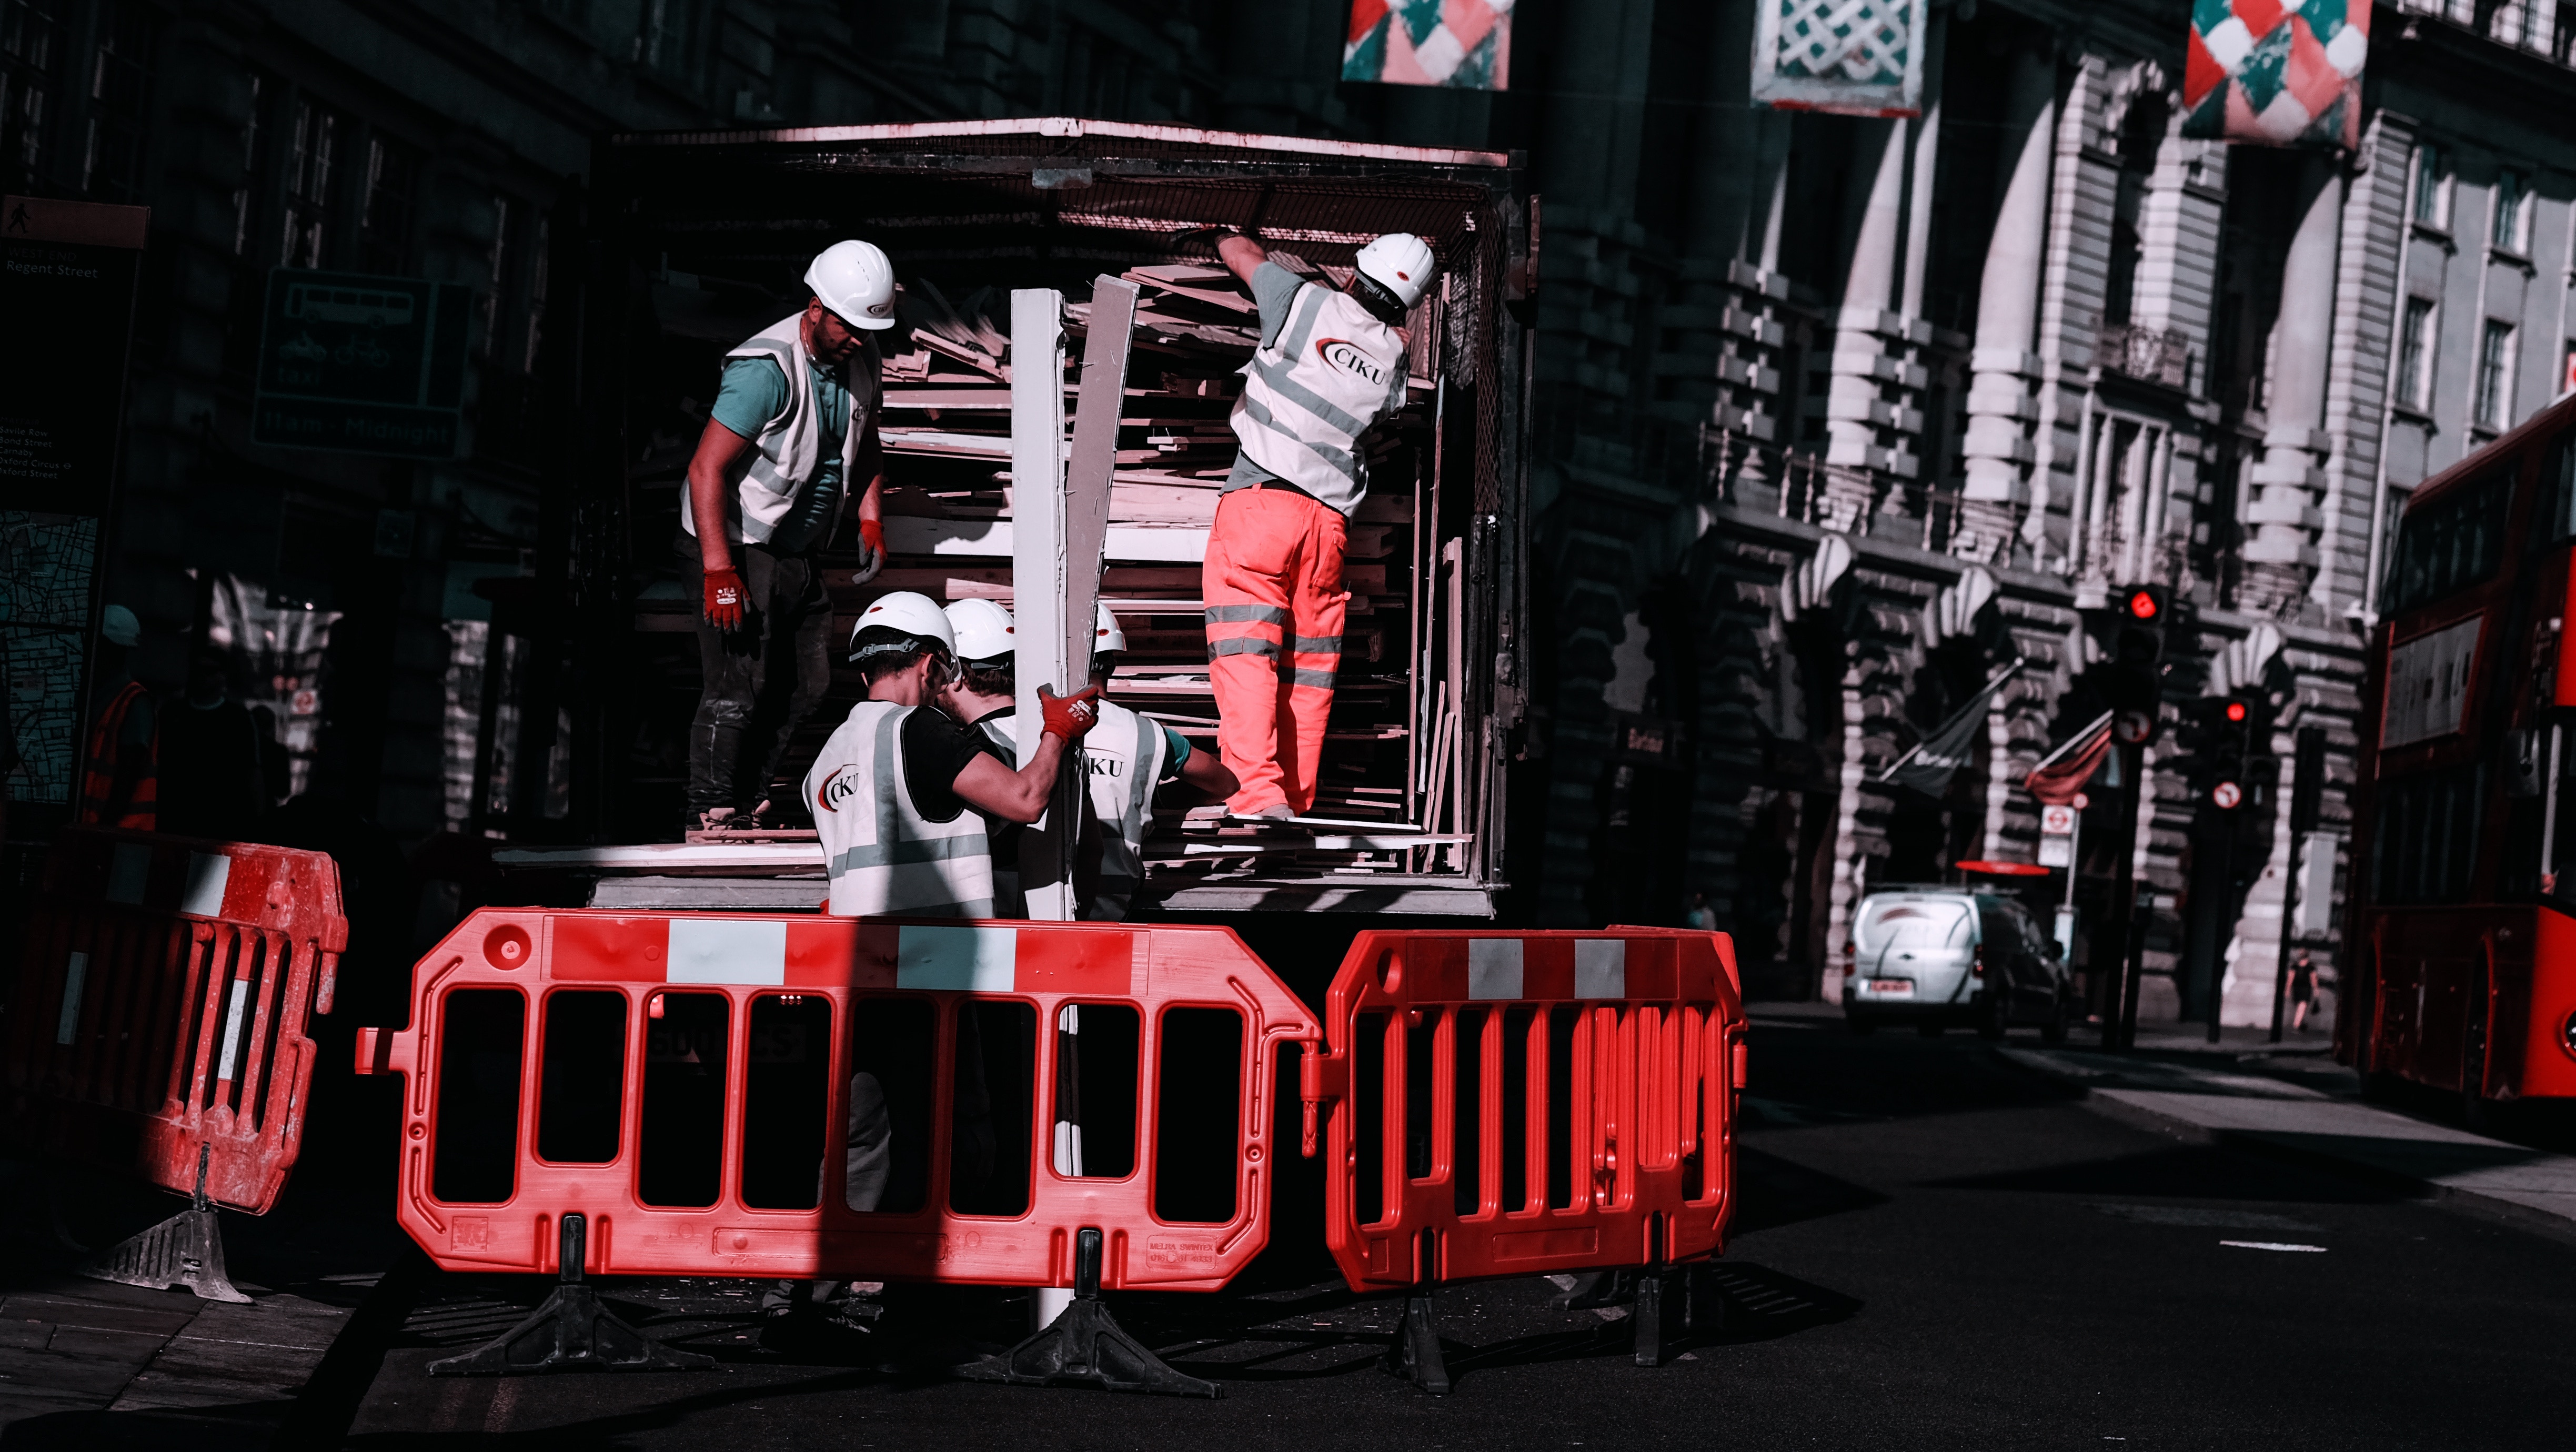 Construction workers assembling barriers